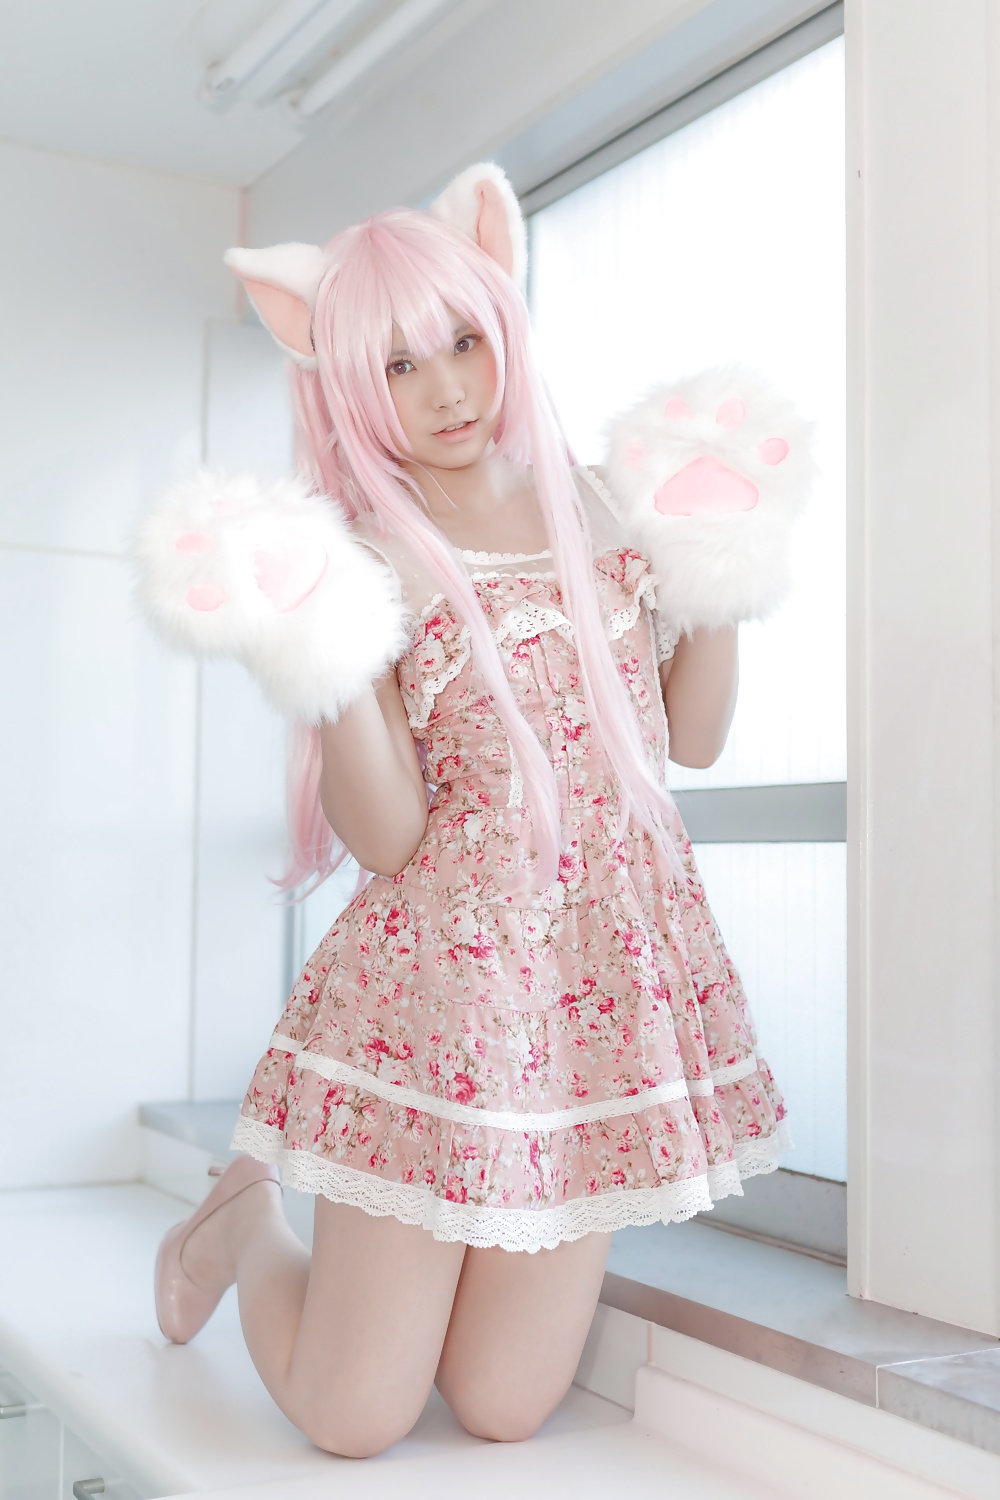 Asian Cosplay in white 1 #34233577